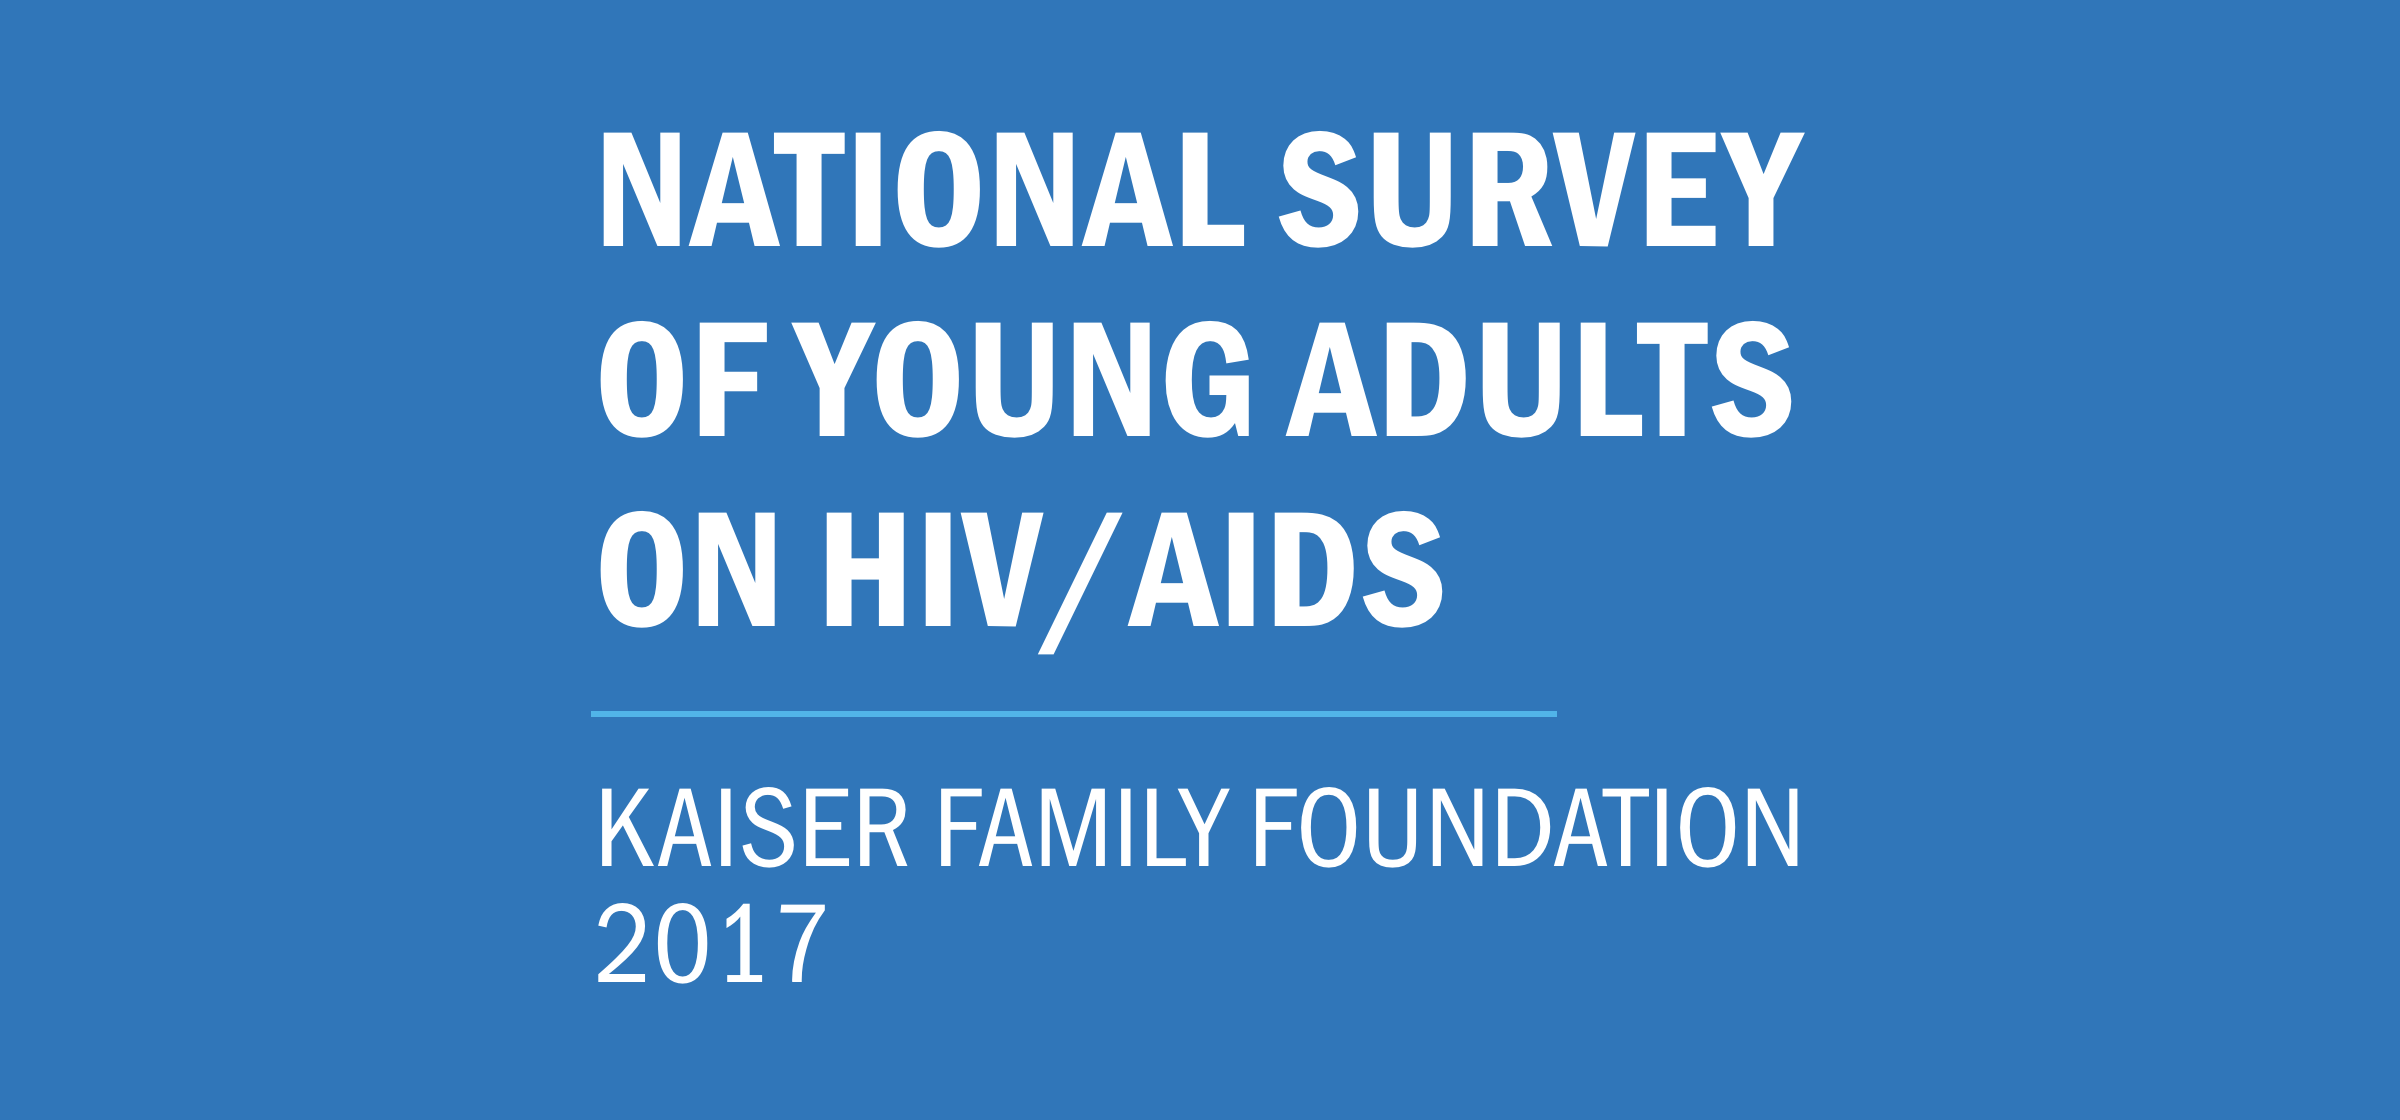 National Survey of Young Adults on HIV/AIDS - Kaiser Family Foundation 2017